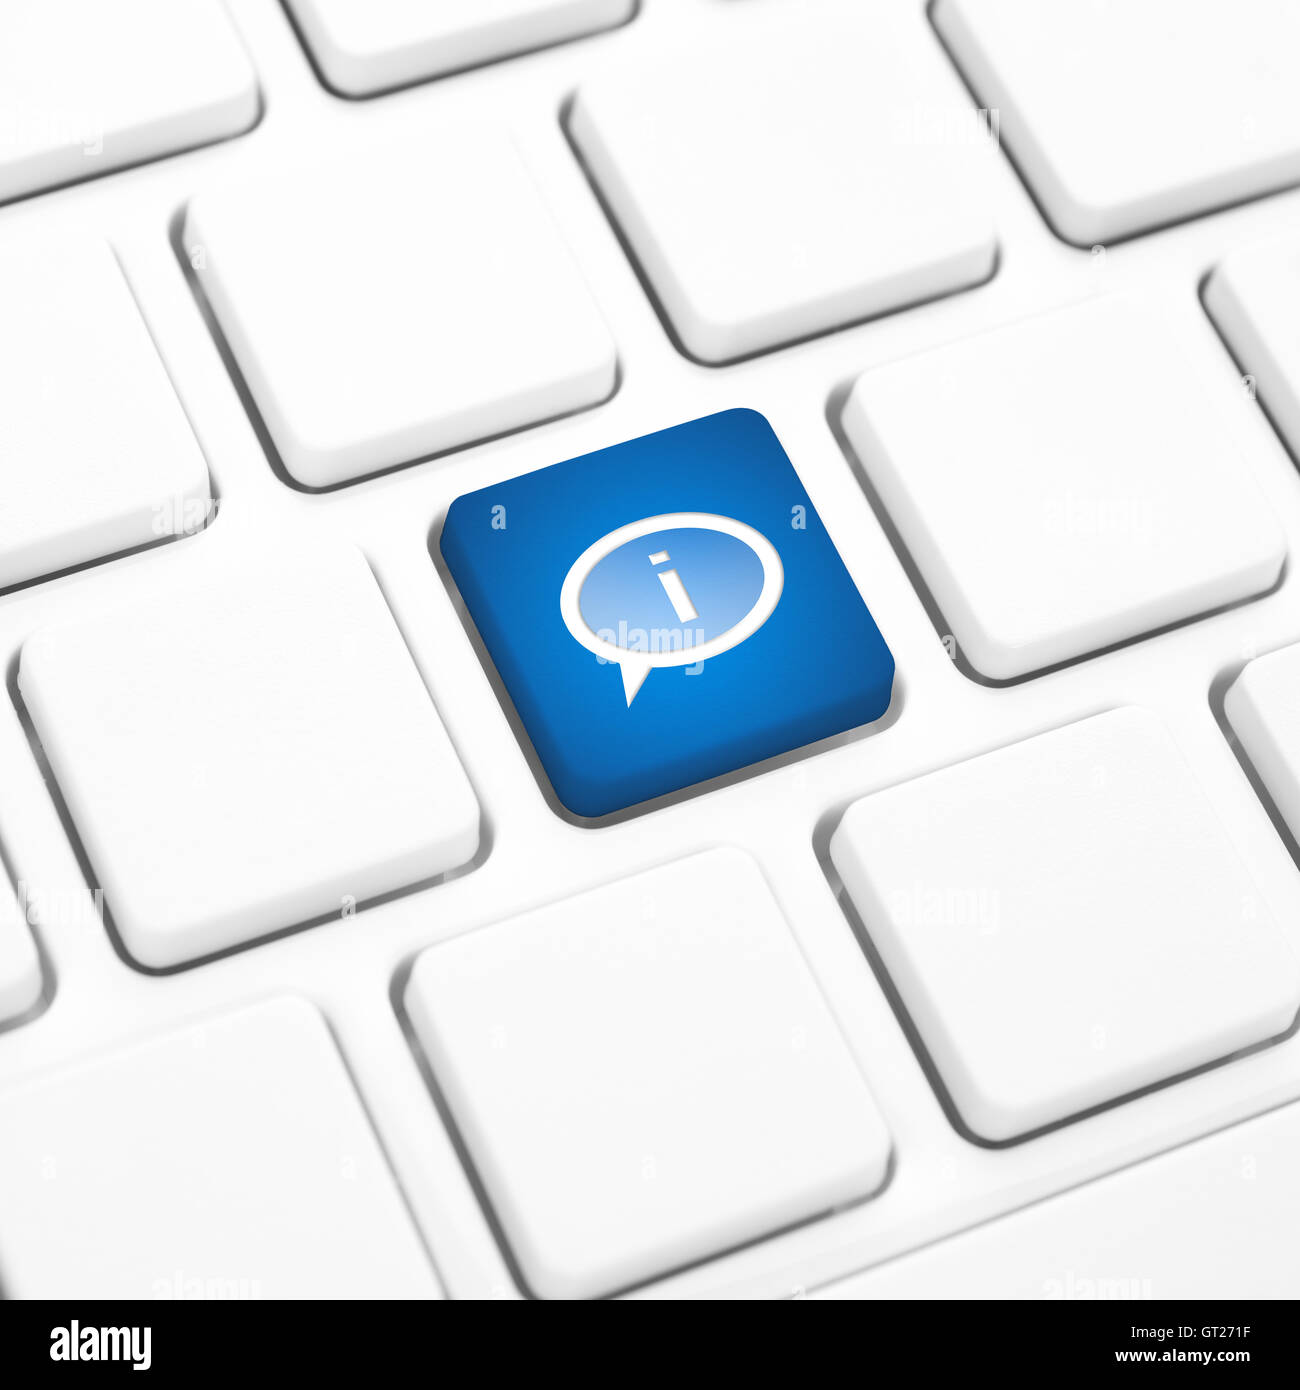 Info or information concept, blue button or key on white keyboard Stock Photo